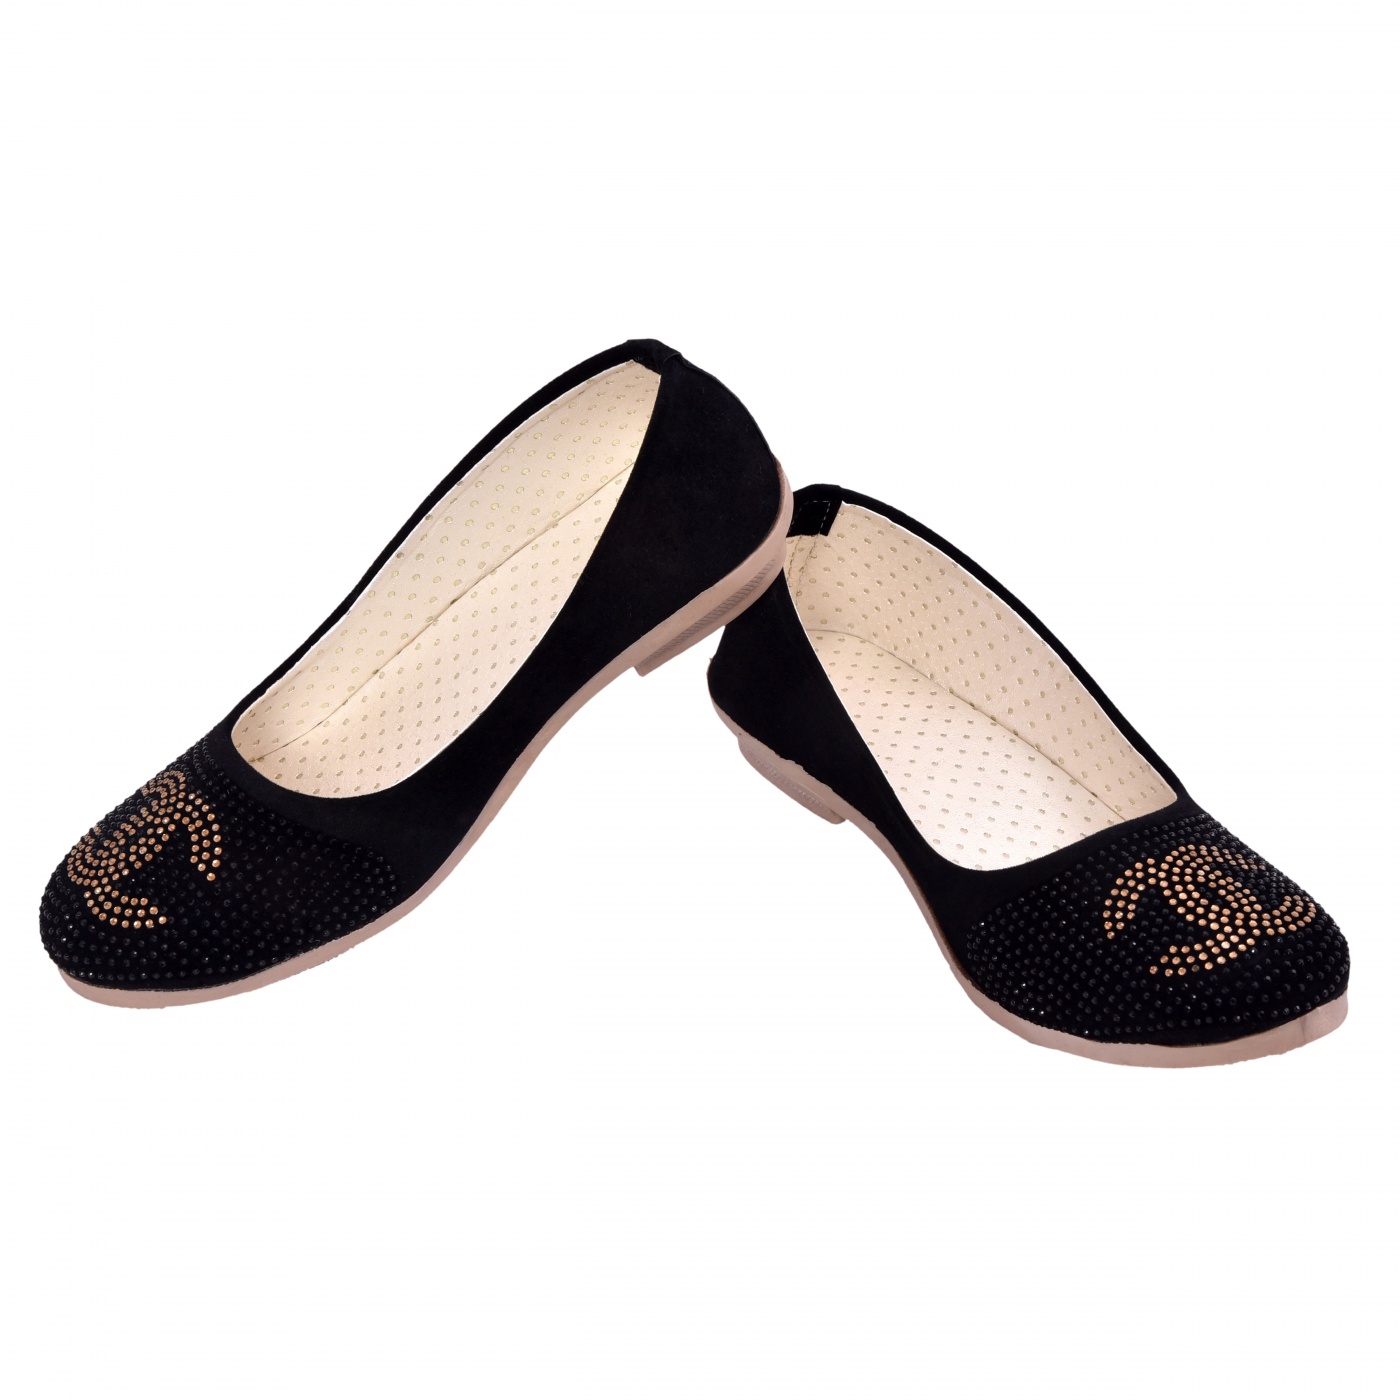 Buy Formal Shoes for Women at Best Price- Bellies /Ballerinas on Sale –  shindeshoes